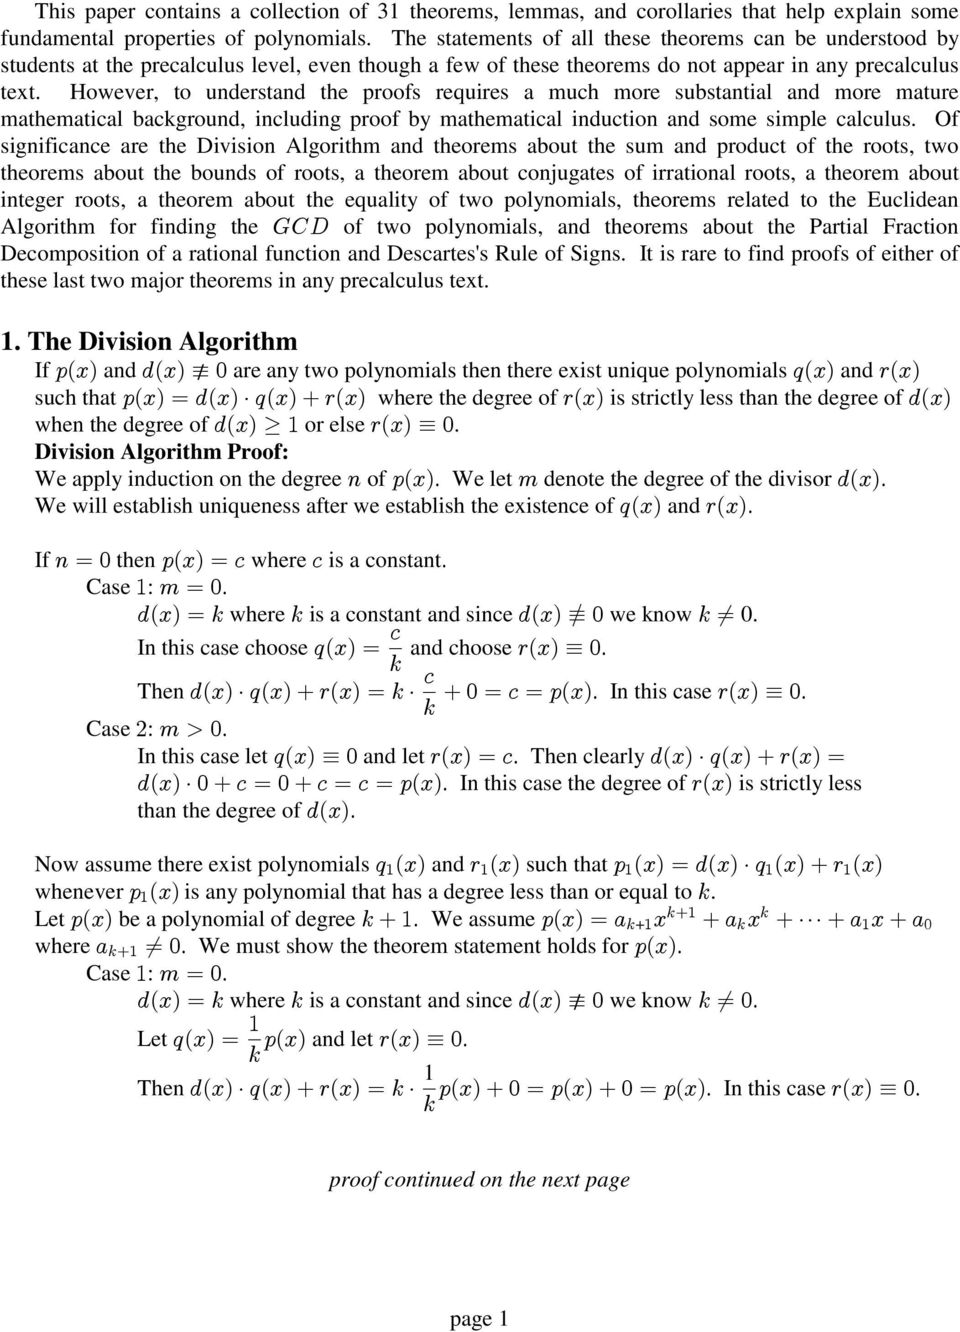 However, to understand the proofs requires a much more substantial and more mature mathematical background, including proof by mathematical induction and some simple calculus.